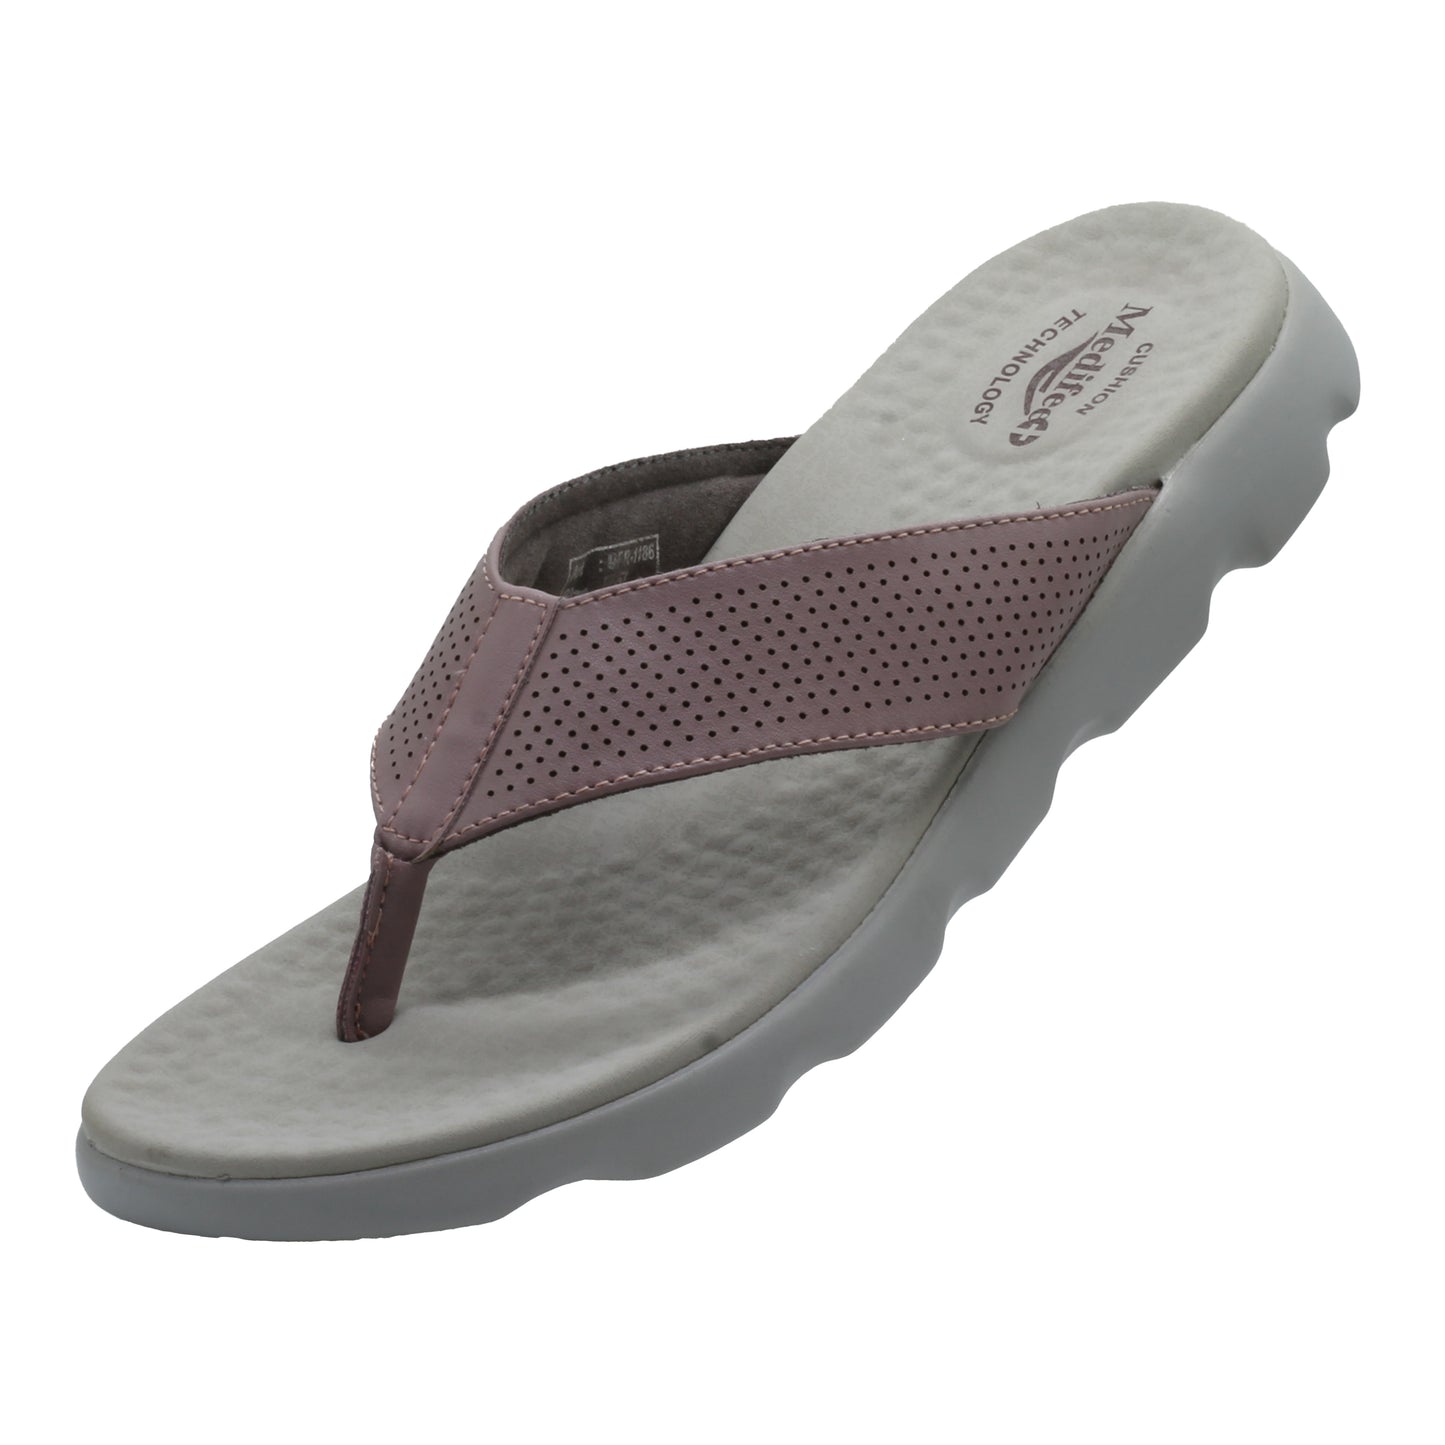 Medifeet Womens Casual Ortho and Diabetic Care Slipper with Arch support MFR 1186